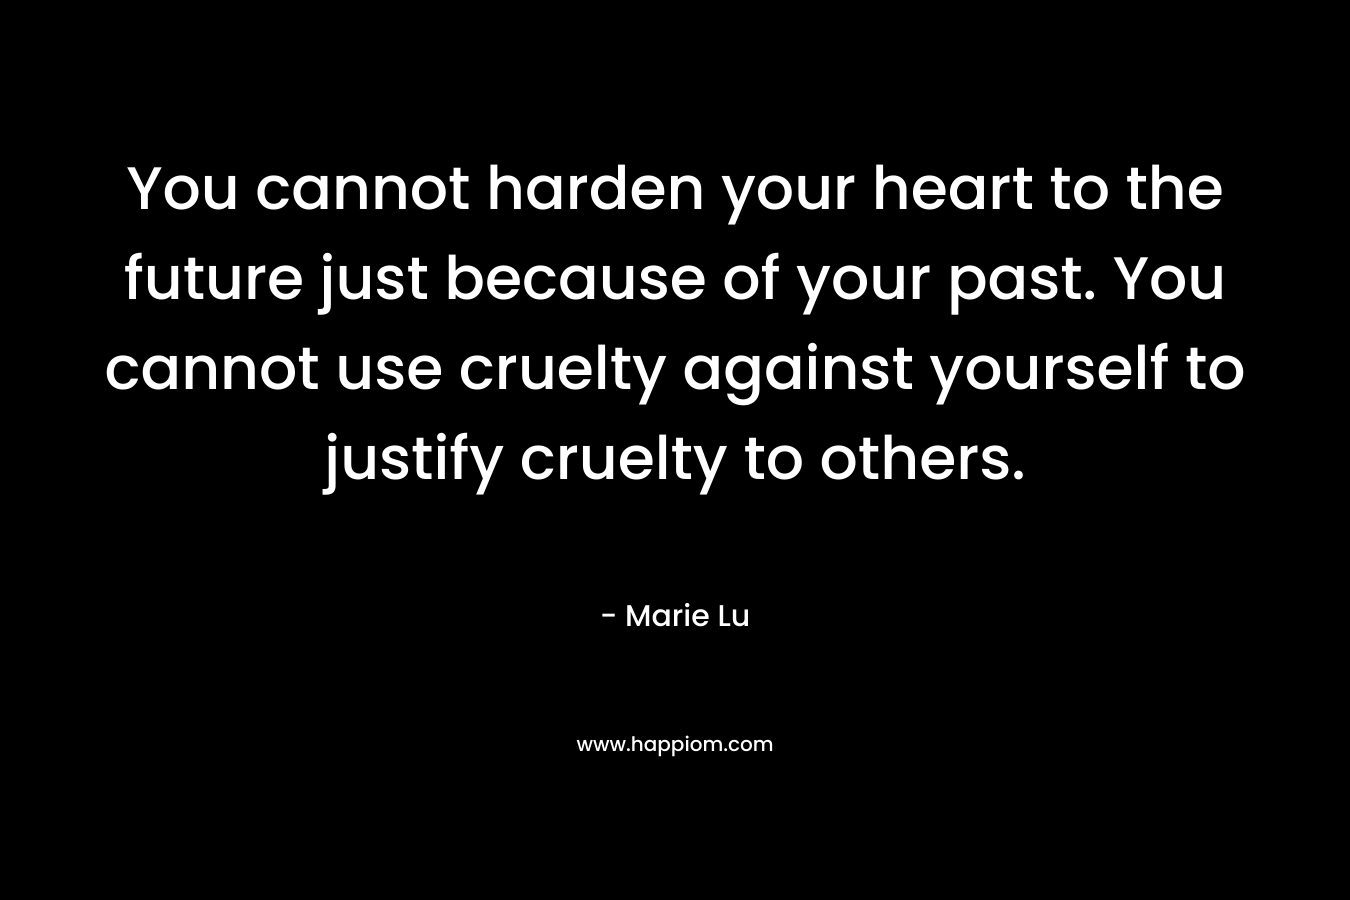 You cannot harden your heart to the future just because of your past. You cannot use cruelty against yourself to justify cruelty to others. – Marie Lu